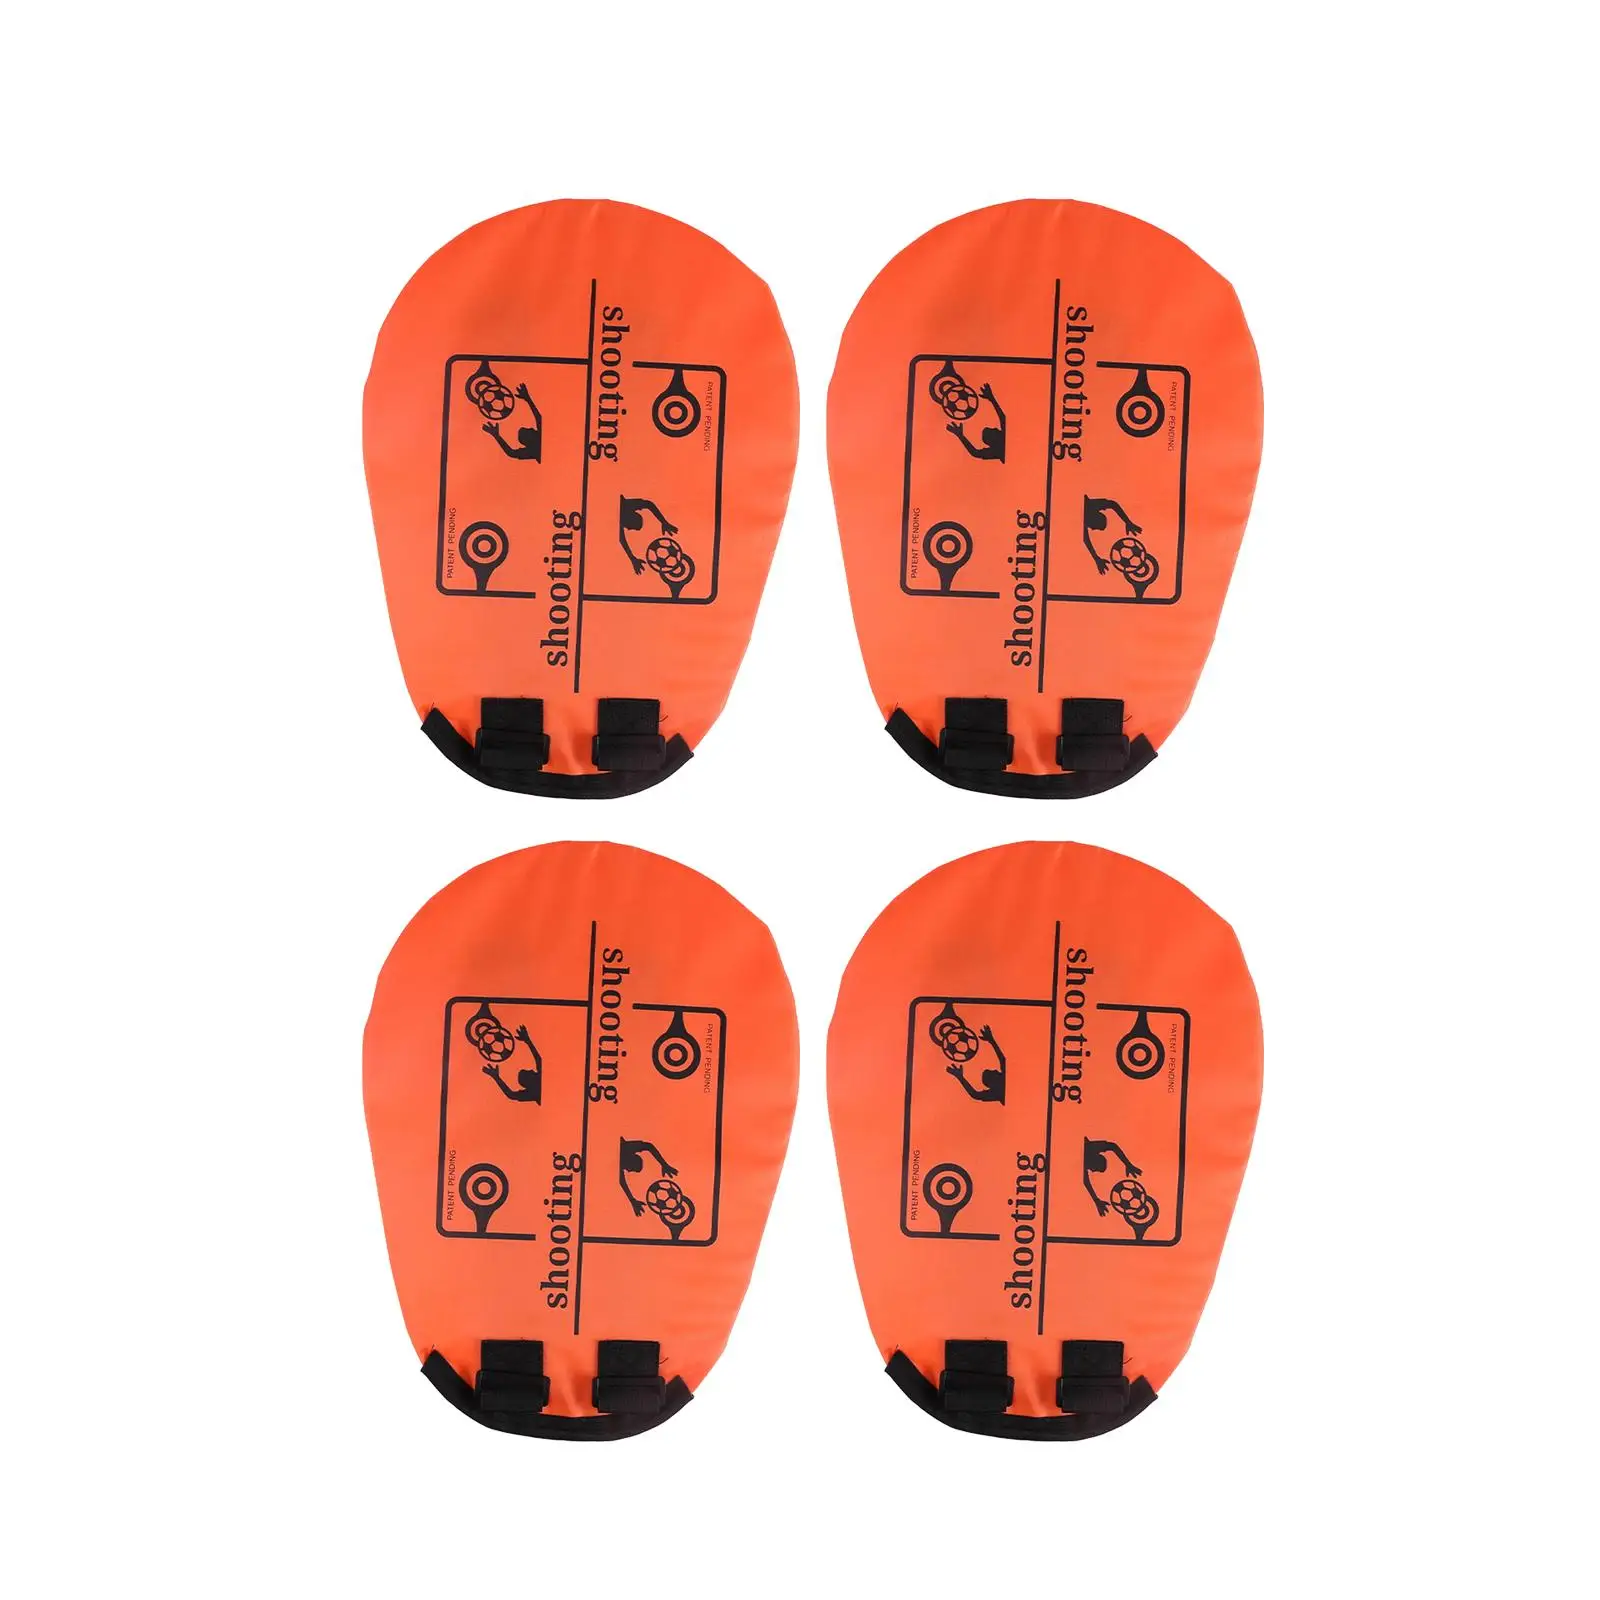 4x Football Training Shooting Target Accessory Easy to Attach Durable Soccer Target Goal for Kick Practice Improve Accuracy